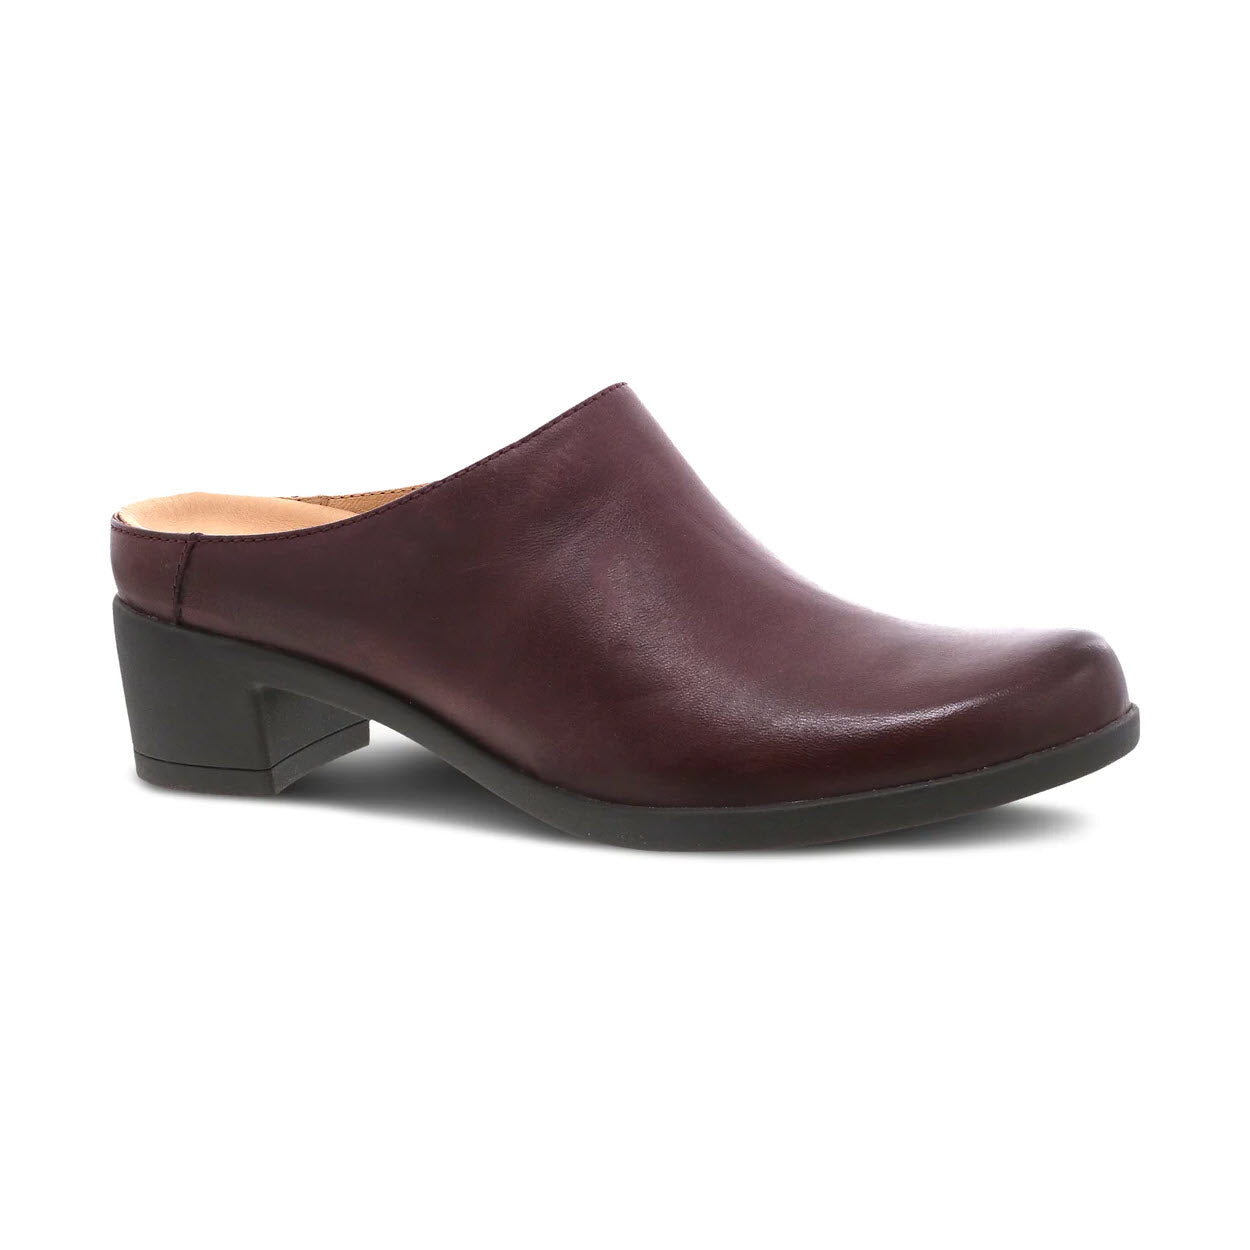 A single Dansko Carrie wine burnished leather backless mule with a low heel and a rounded toe, isolated on a white background.